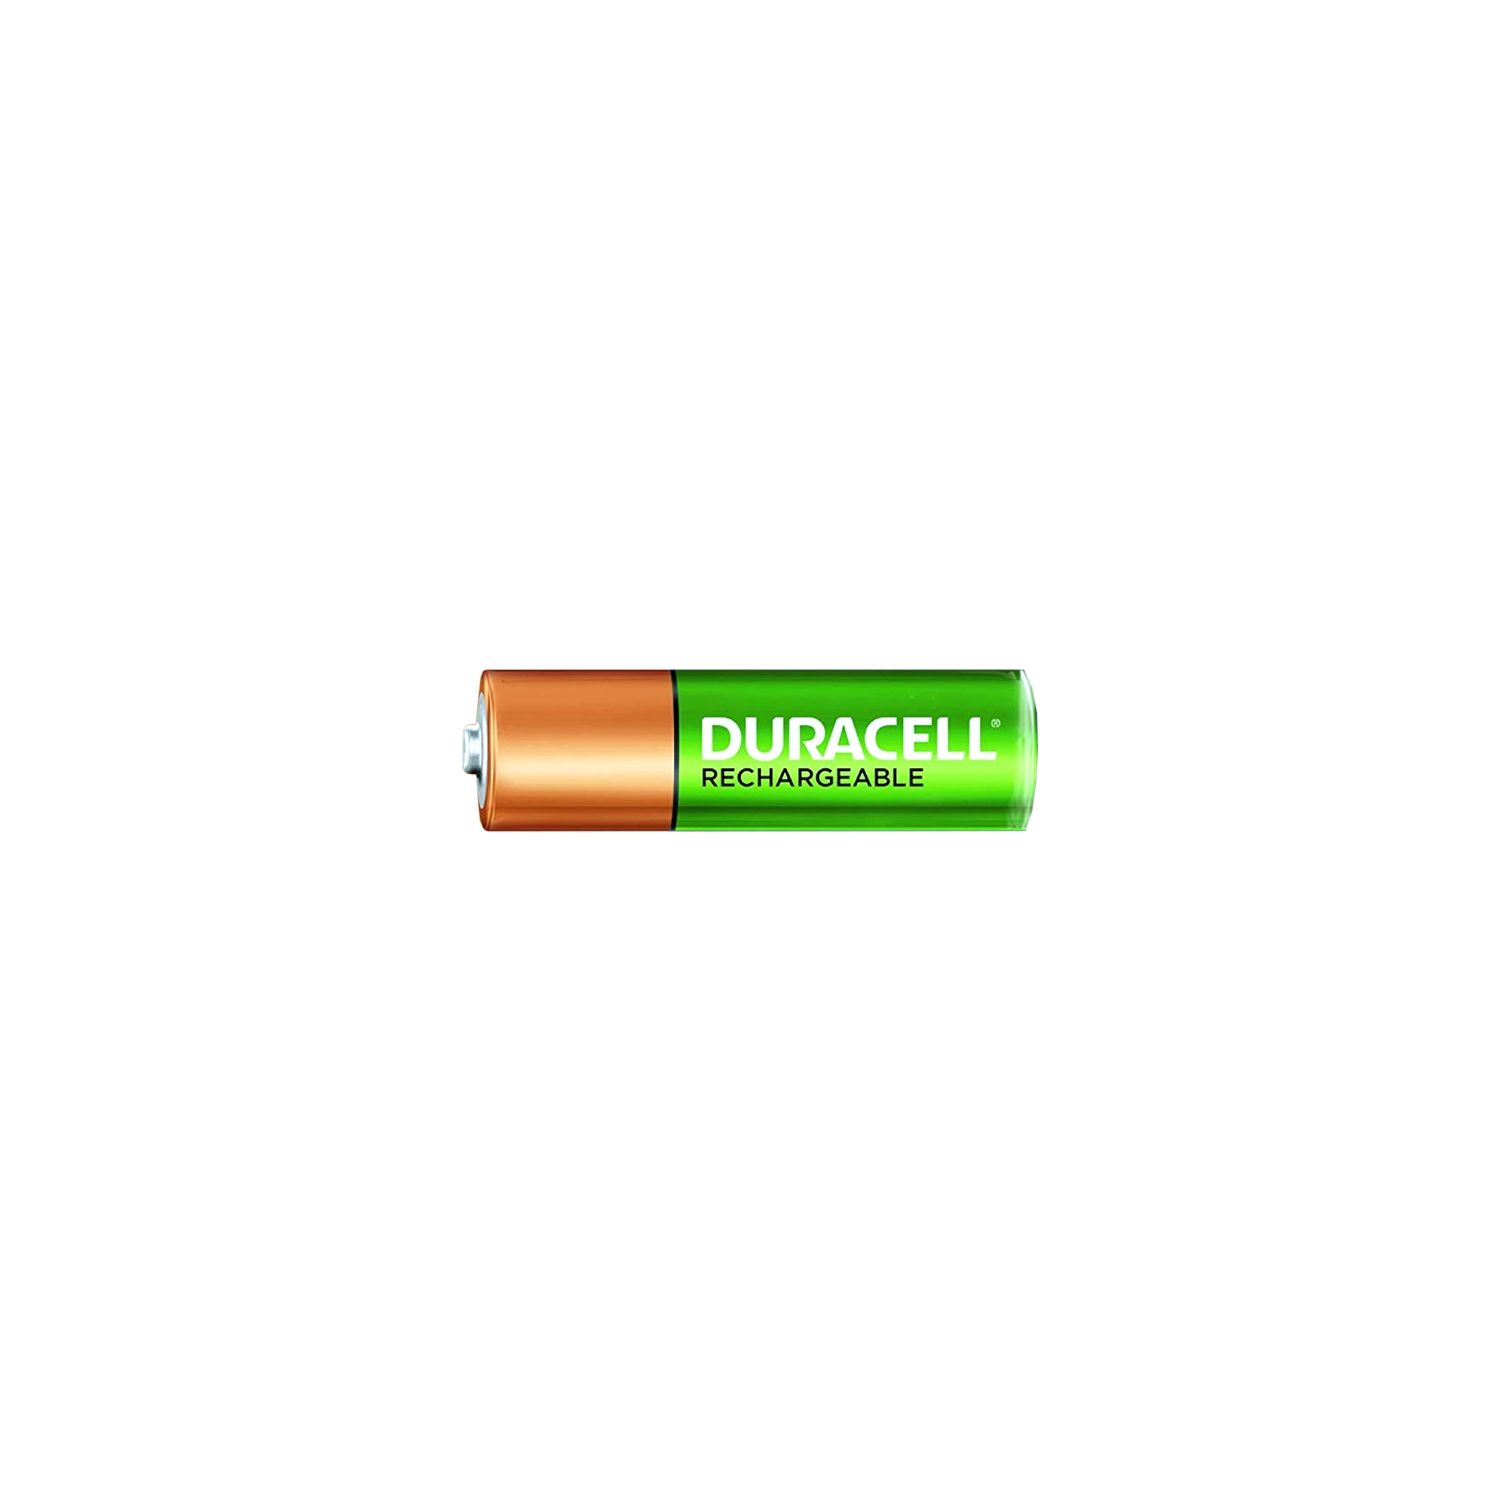 48-Pack AA Duracell Rechargeable (DX1500) Batteries (2500 mAh)